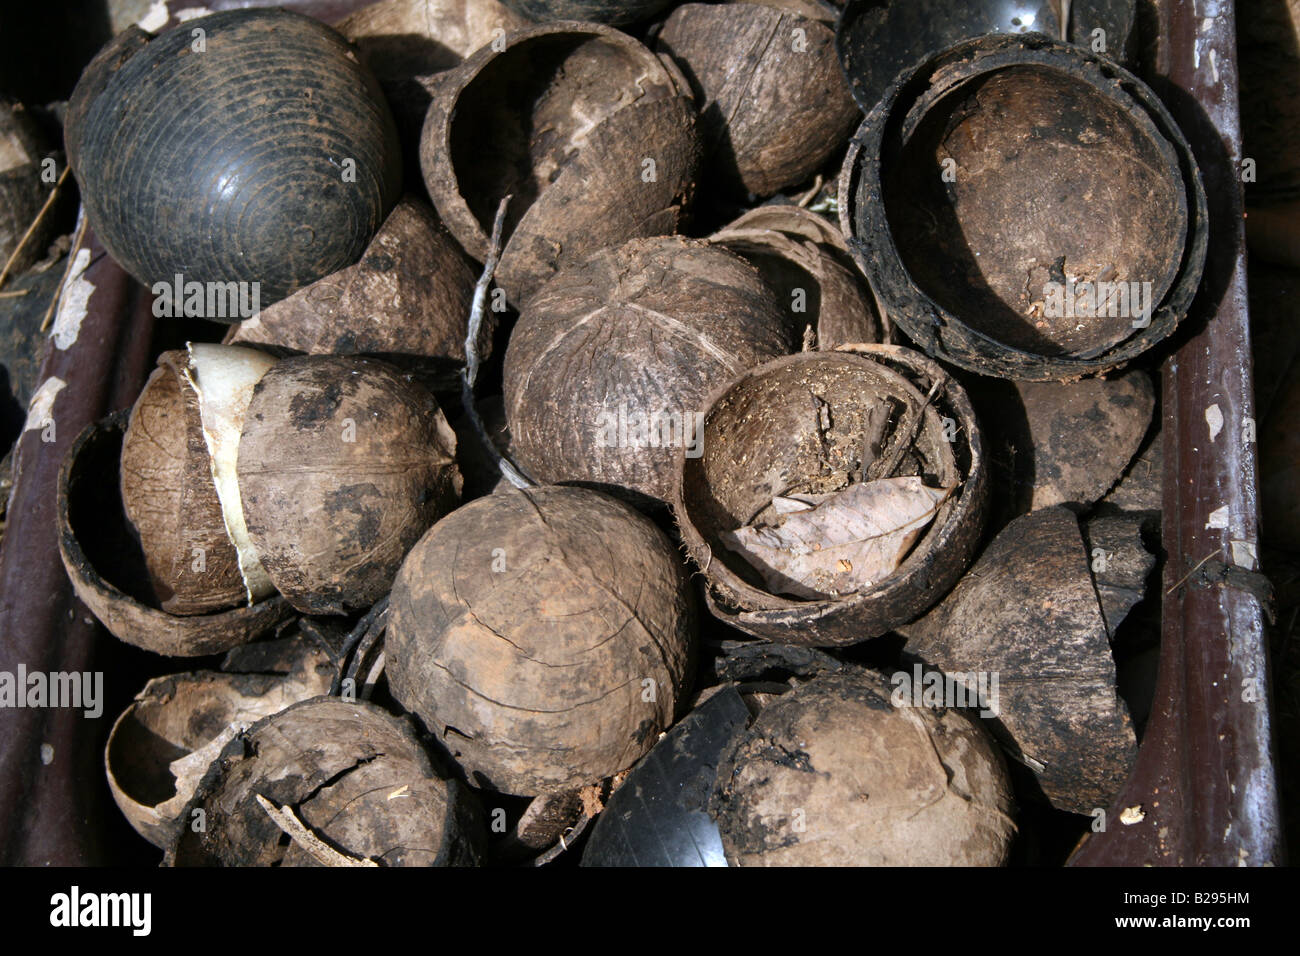 Tray filled with dried empty brown Coconut shells mixed with artificial shells used for rubber tapping and agriculture purposes Stock Photo